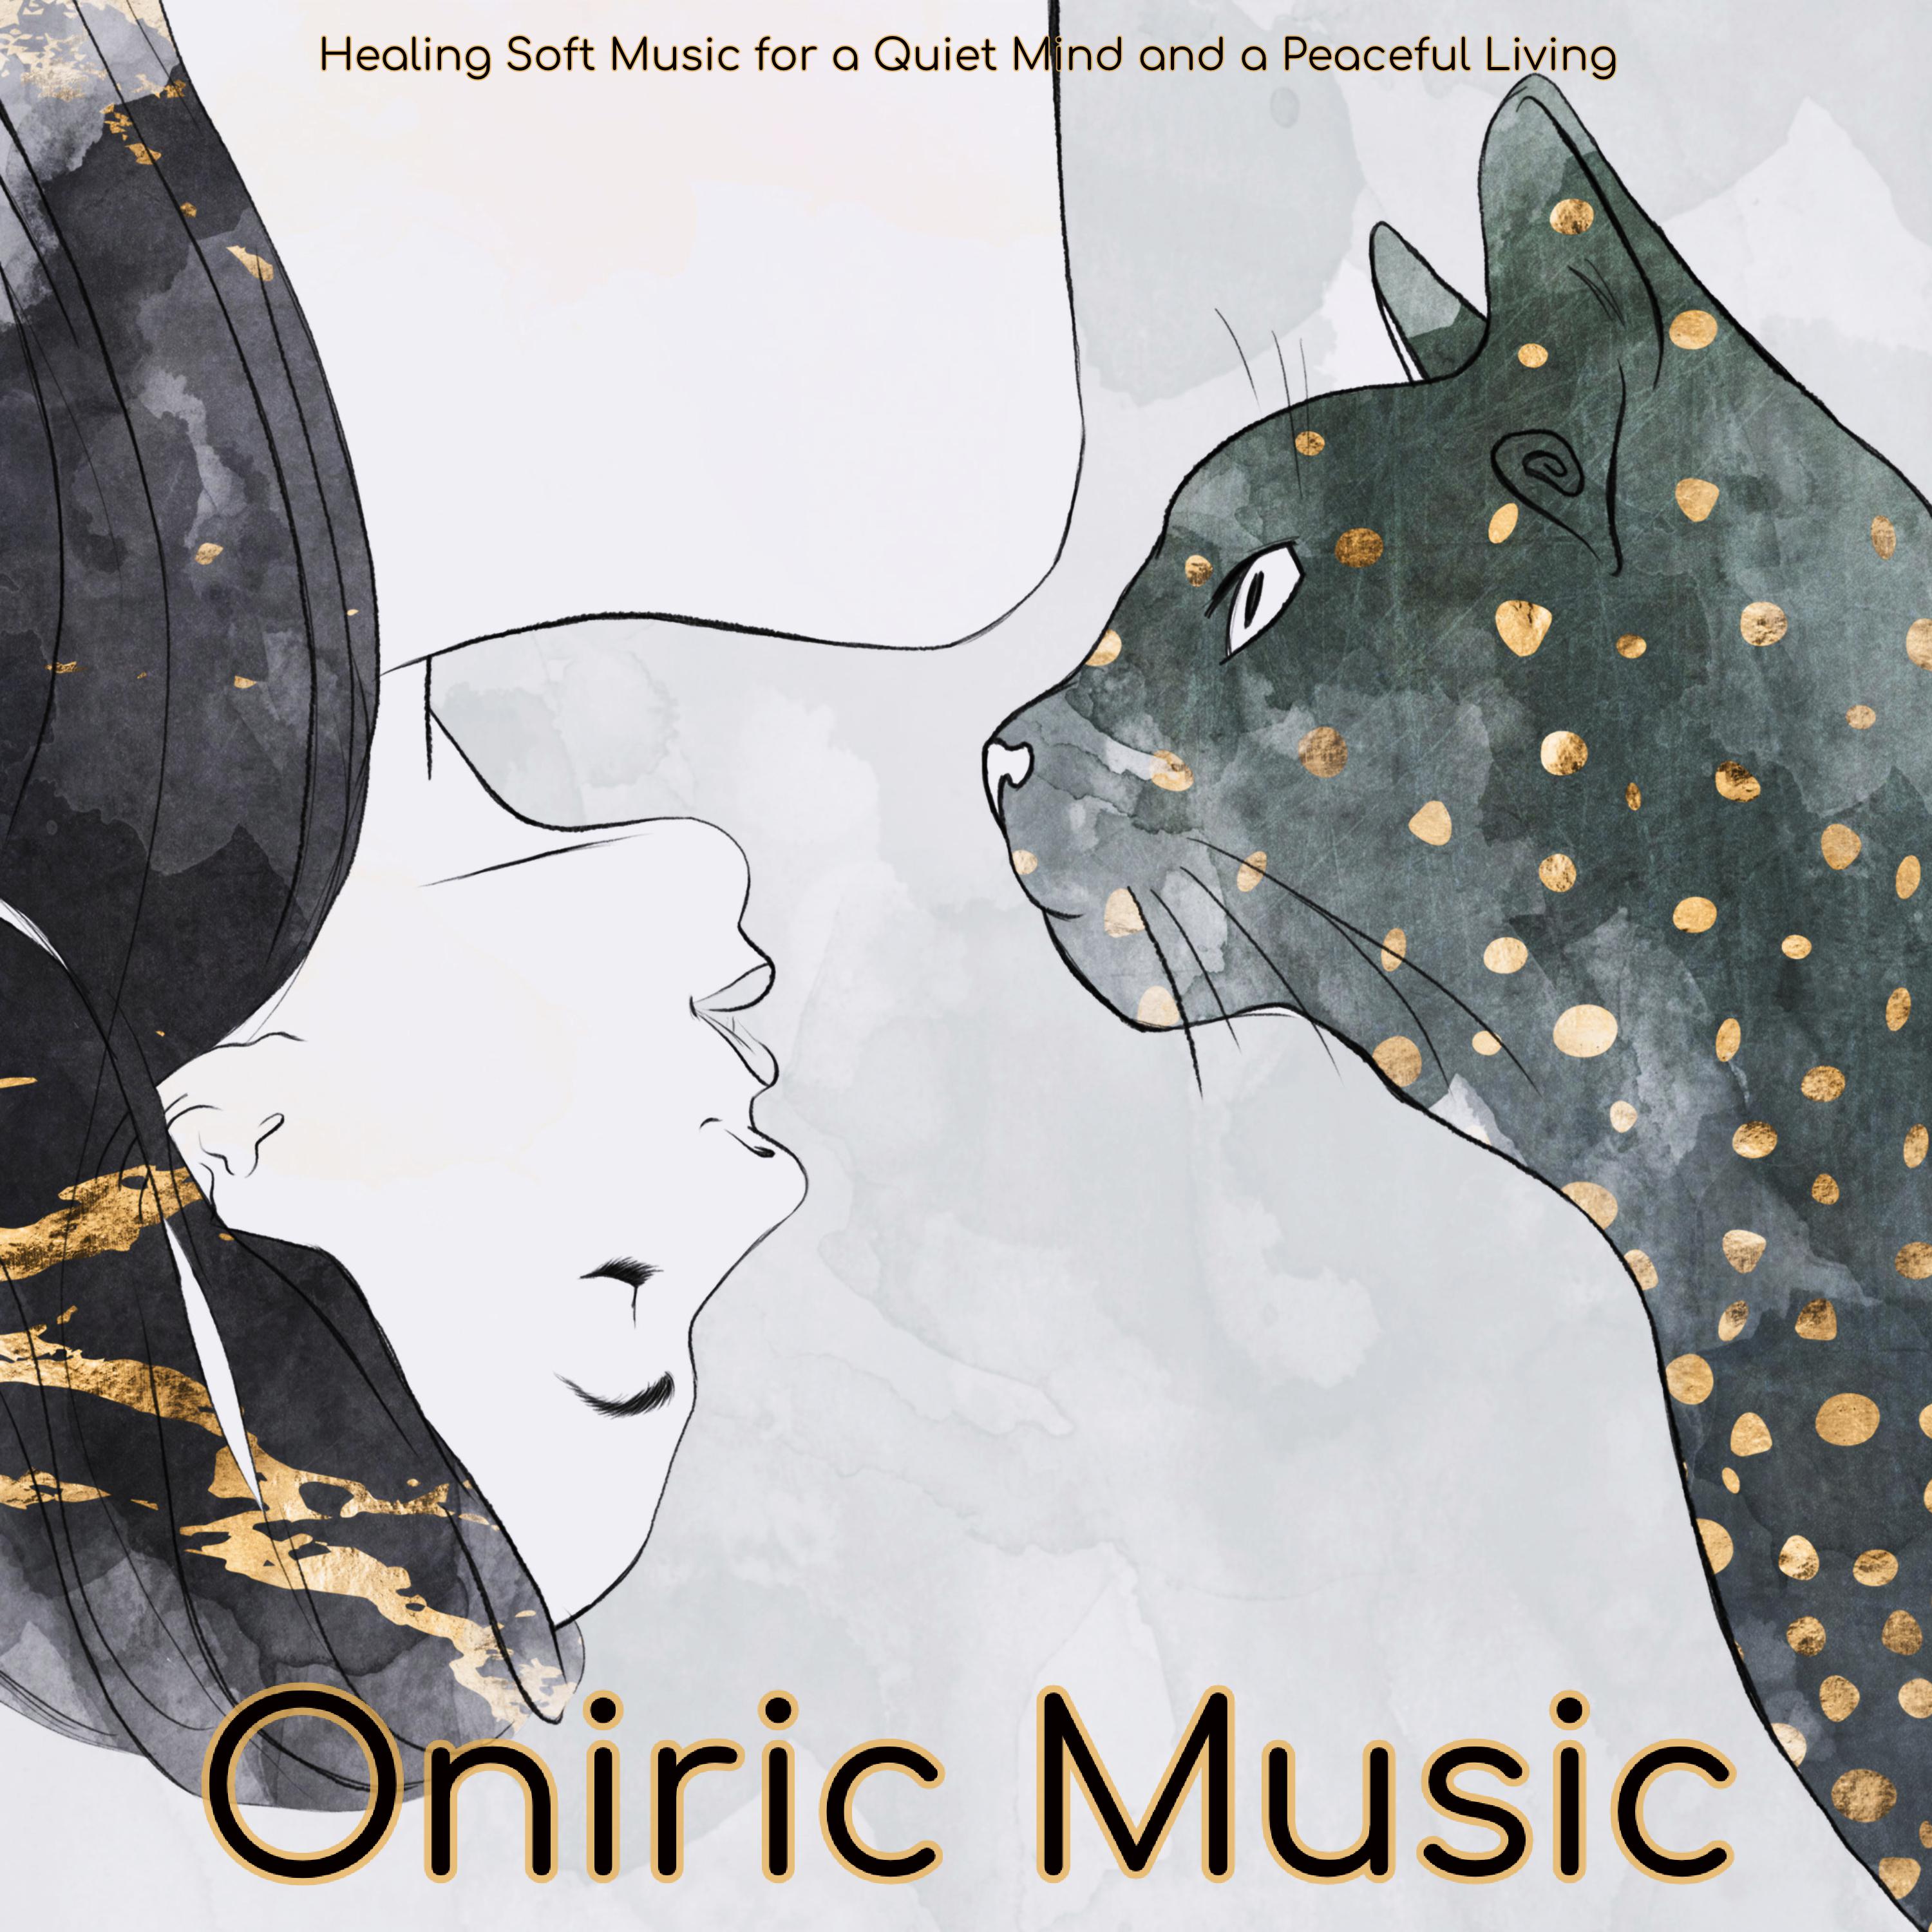 Oniric Music  Healing Soft Music for a Quiet Mind and a Peaceful Living